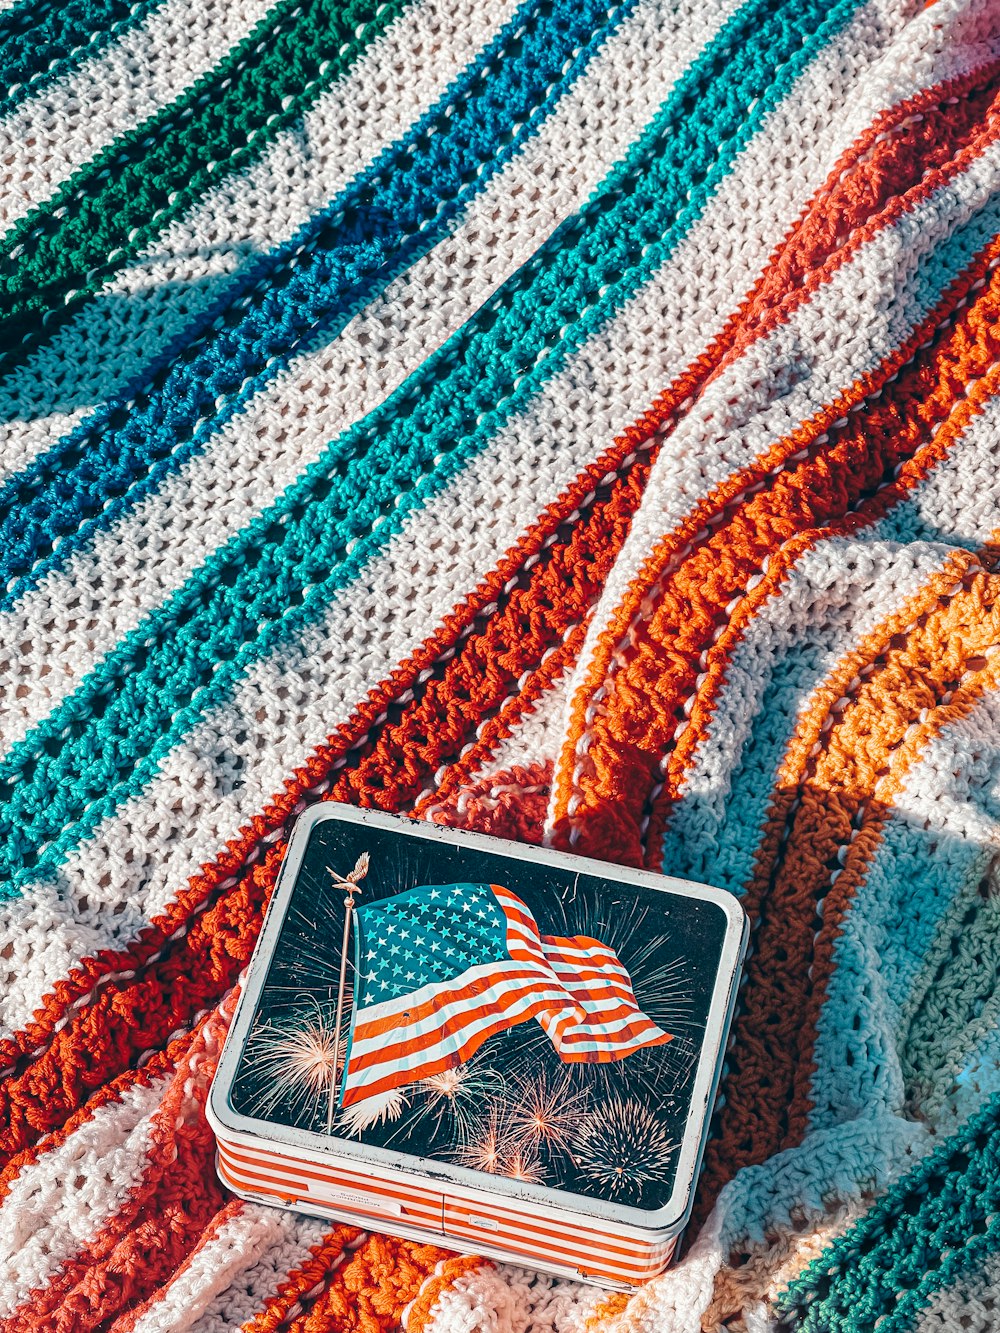 a crocheted blanket with an american flag on it